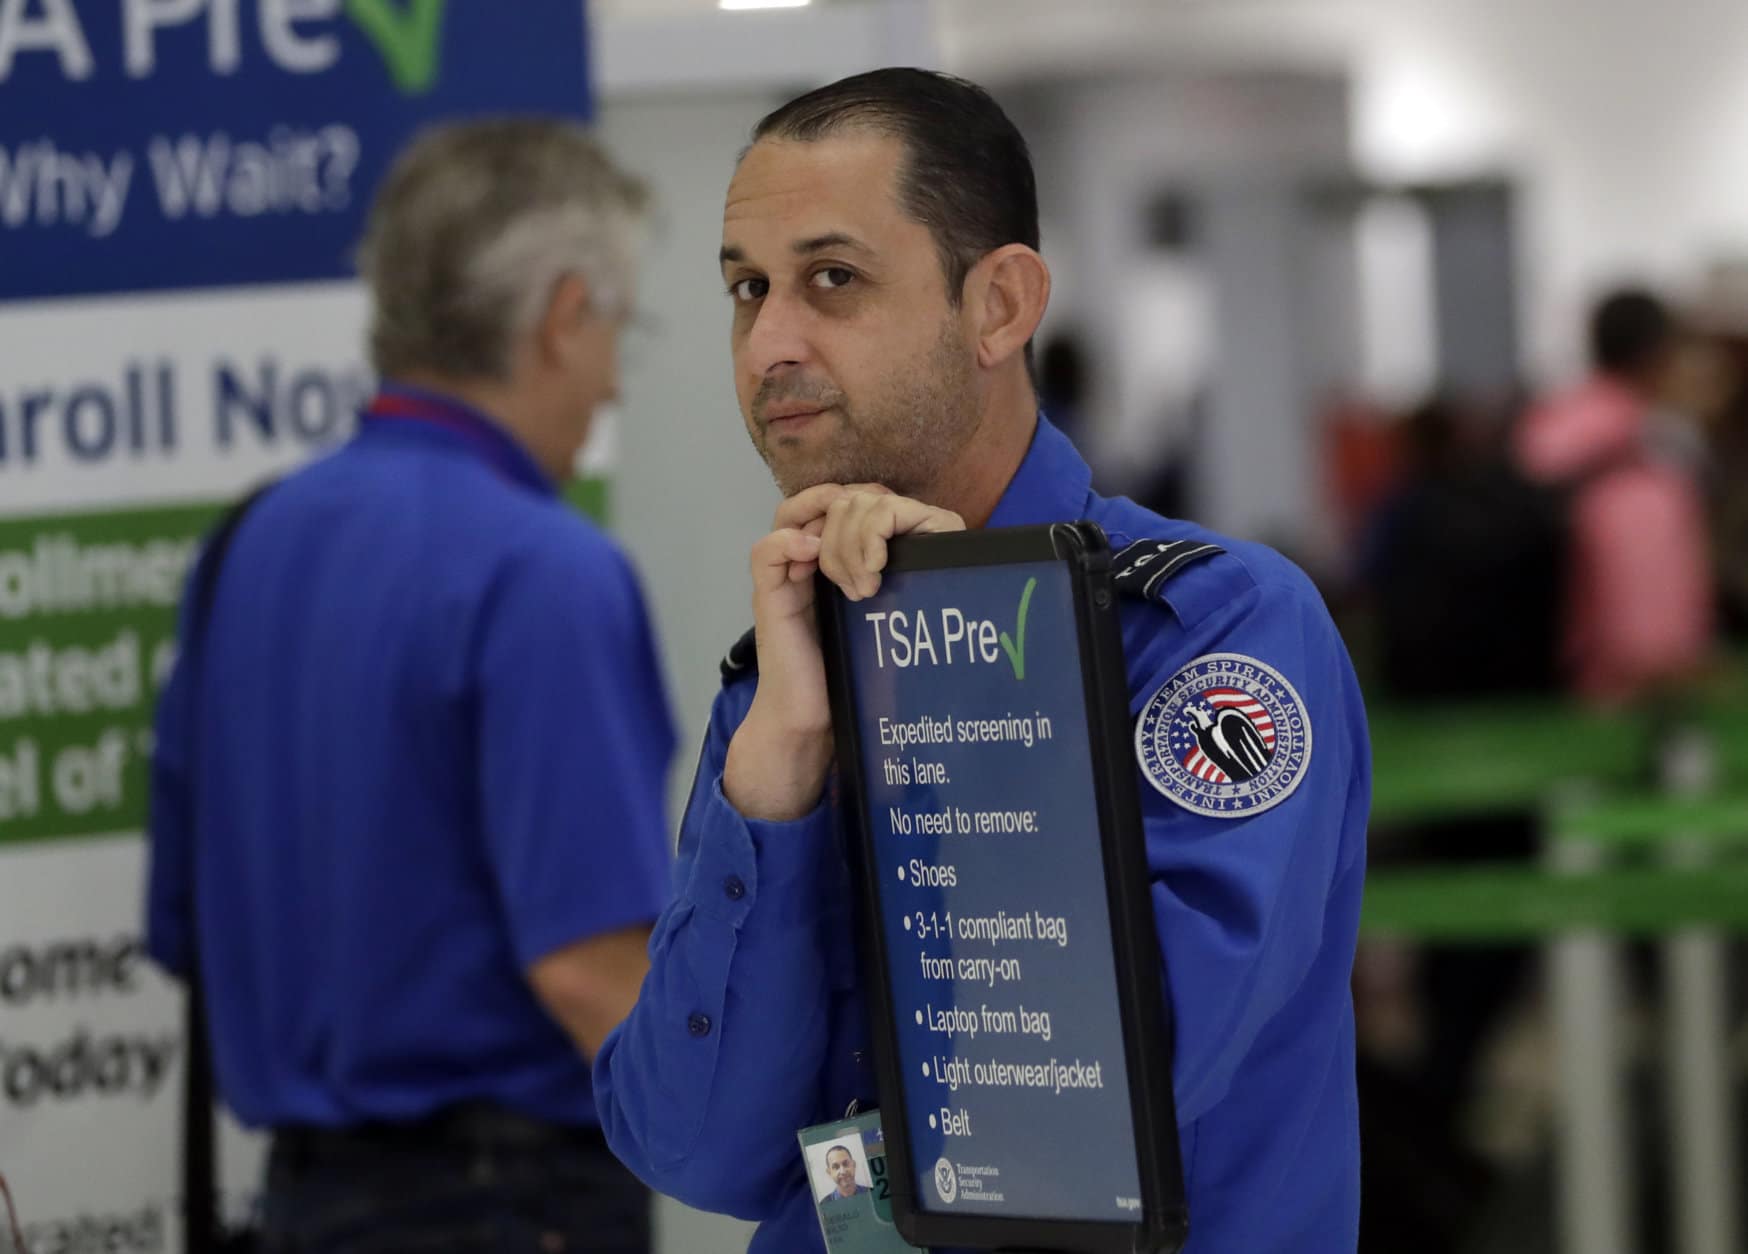 A Transportation Security Administration (TSA) employee works at a security checkpoint at Miami International Airport, Friday, Jan. 18, 2019, in Miami. The three-day holiday weekend is likely to bring bigger airport crowds. (AP Photo/Lynne Sladky)